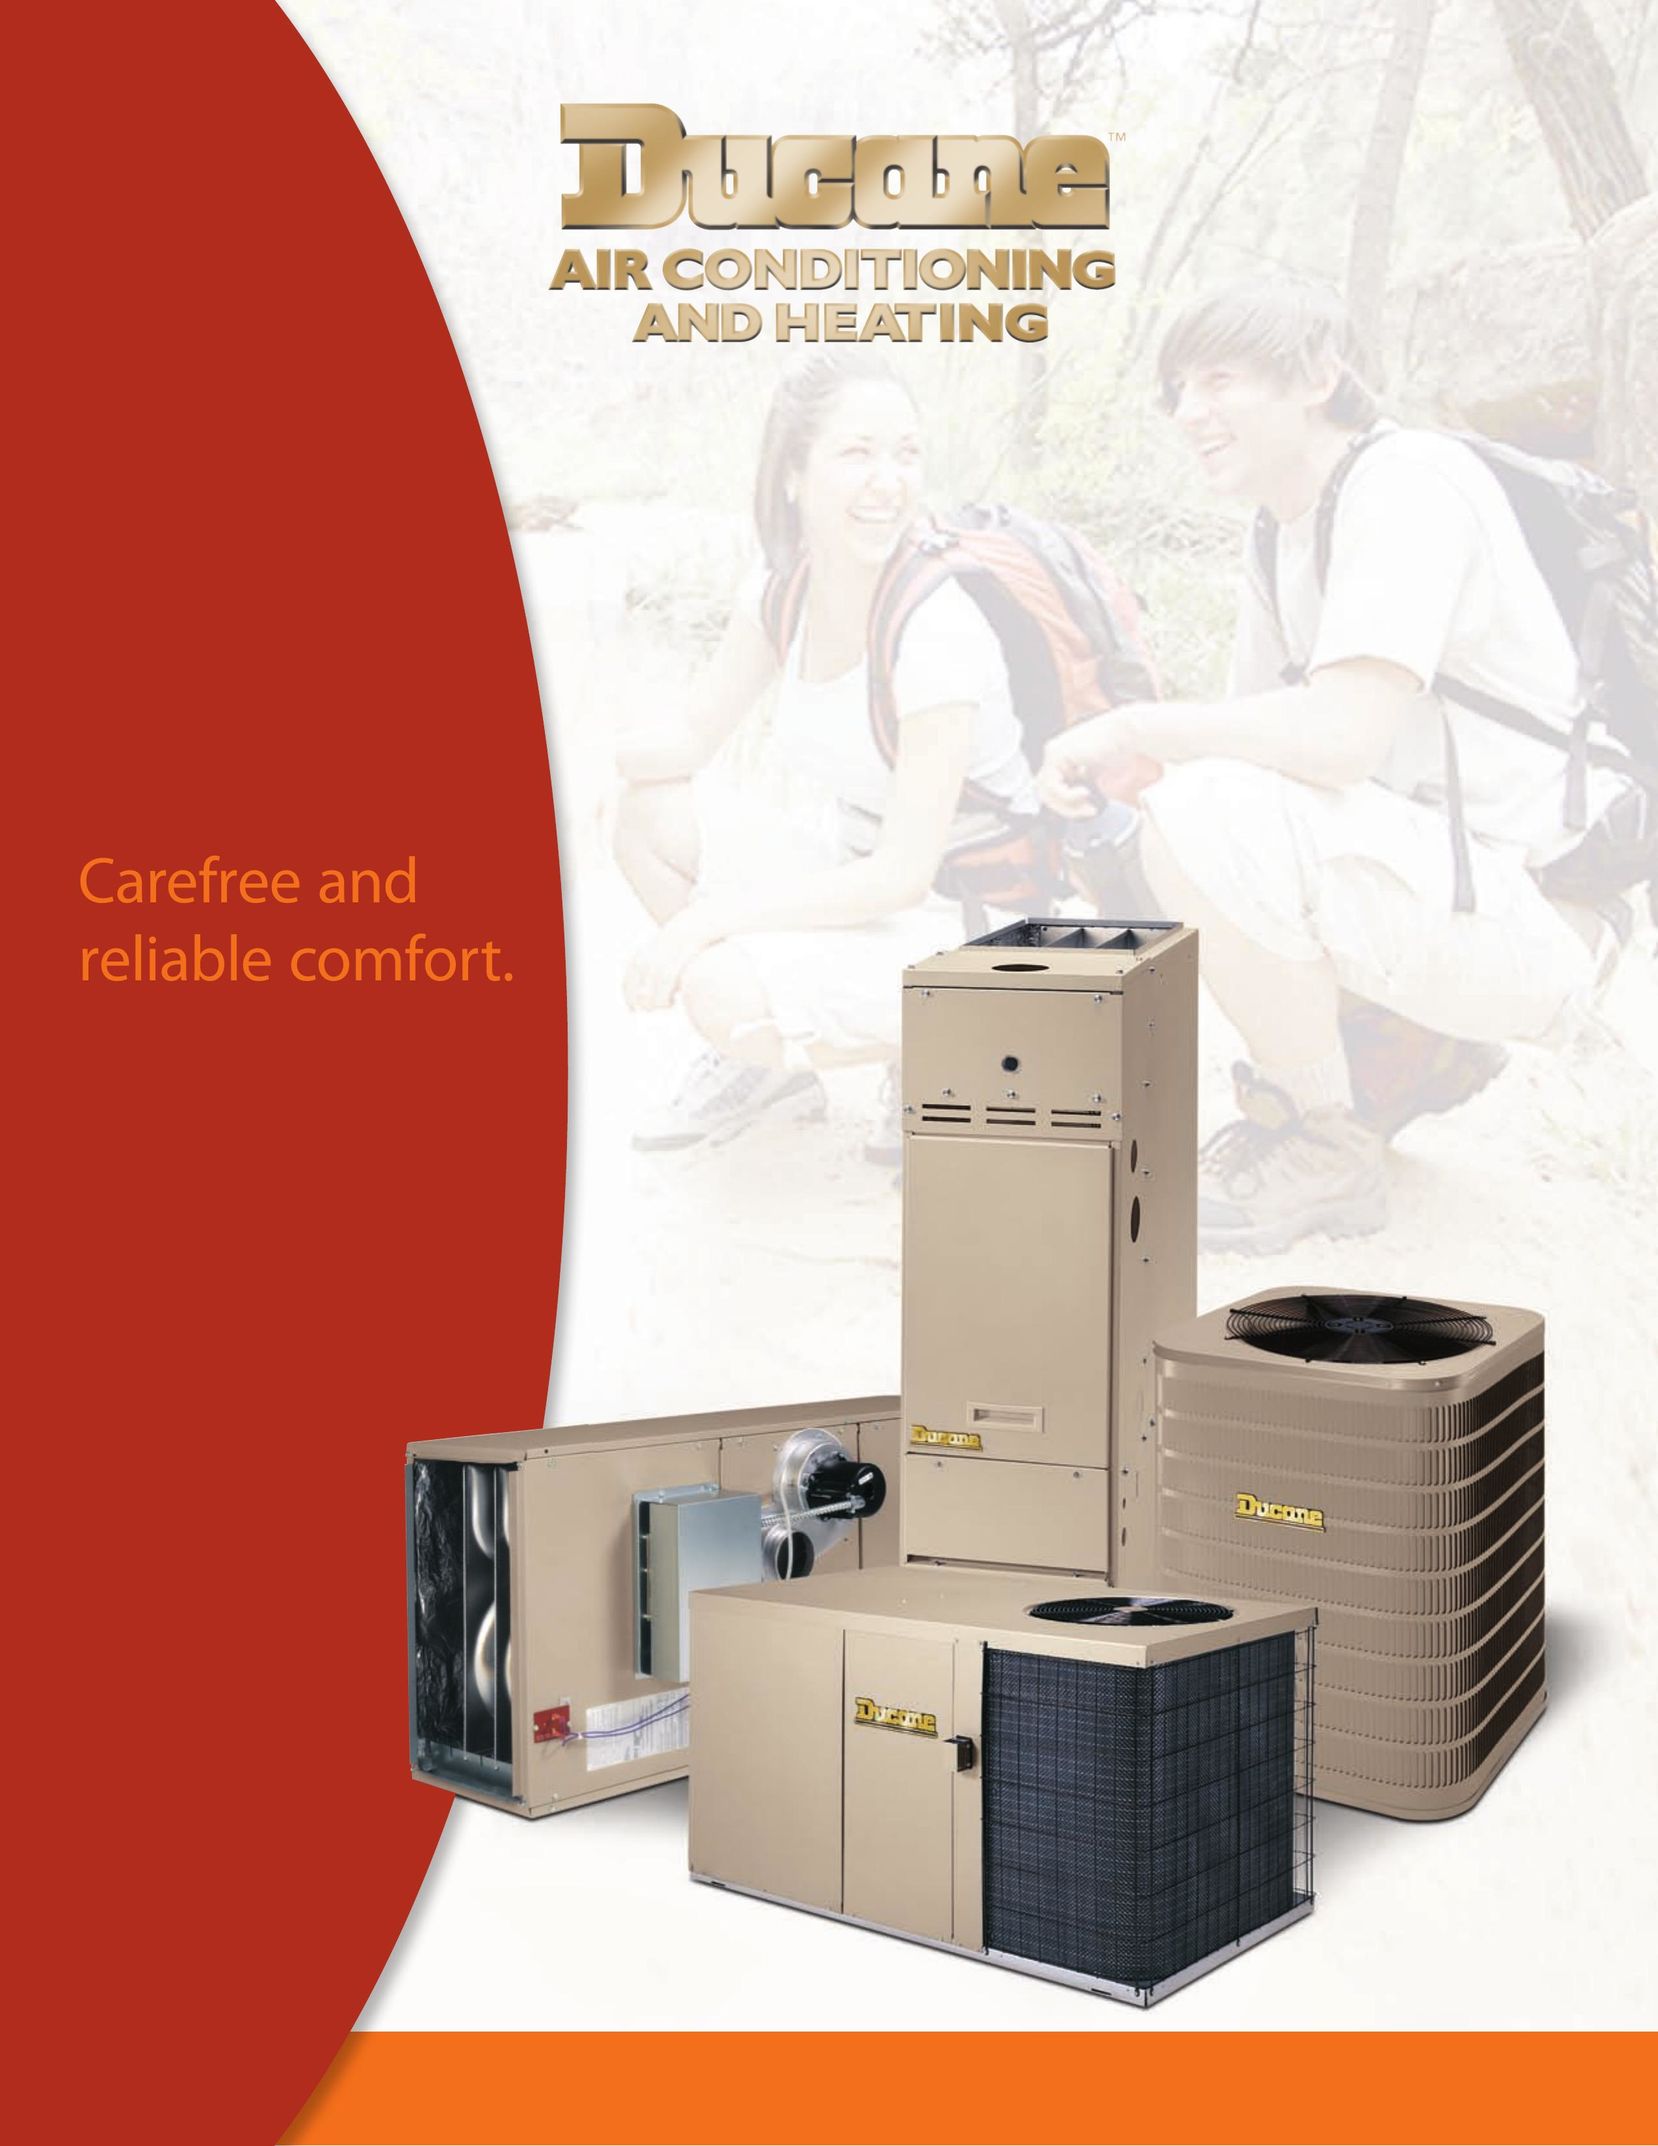 Ducane (HVAC) Air Conditioning and Heating Air Conditioner User Manual